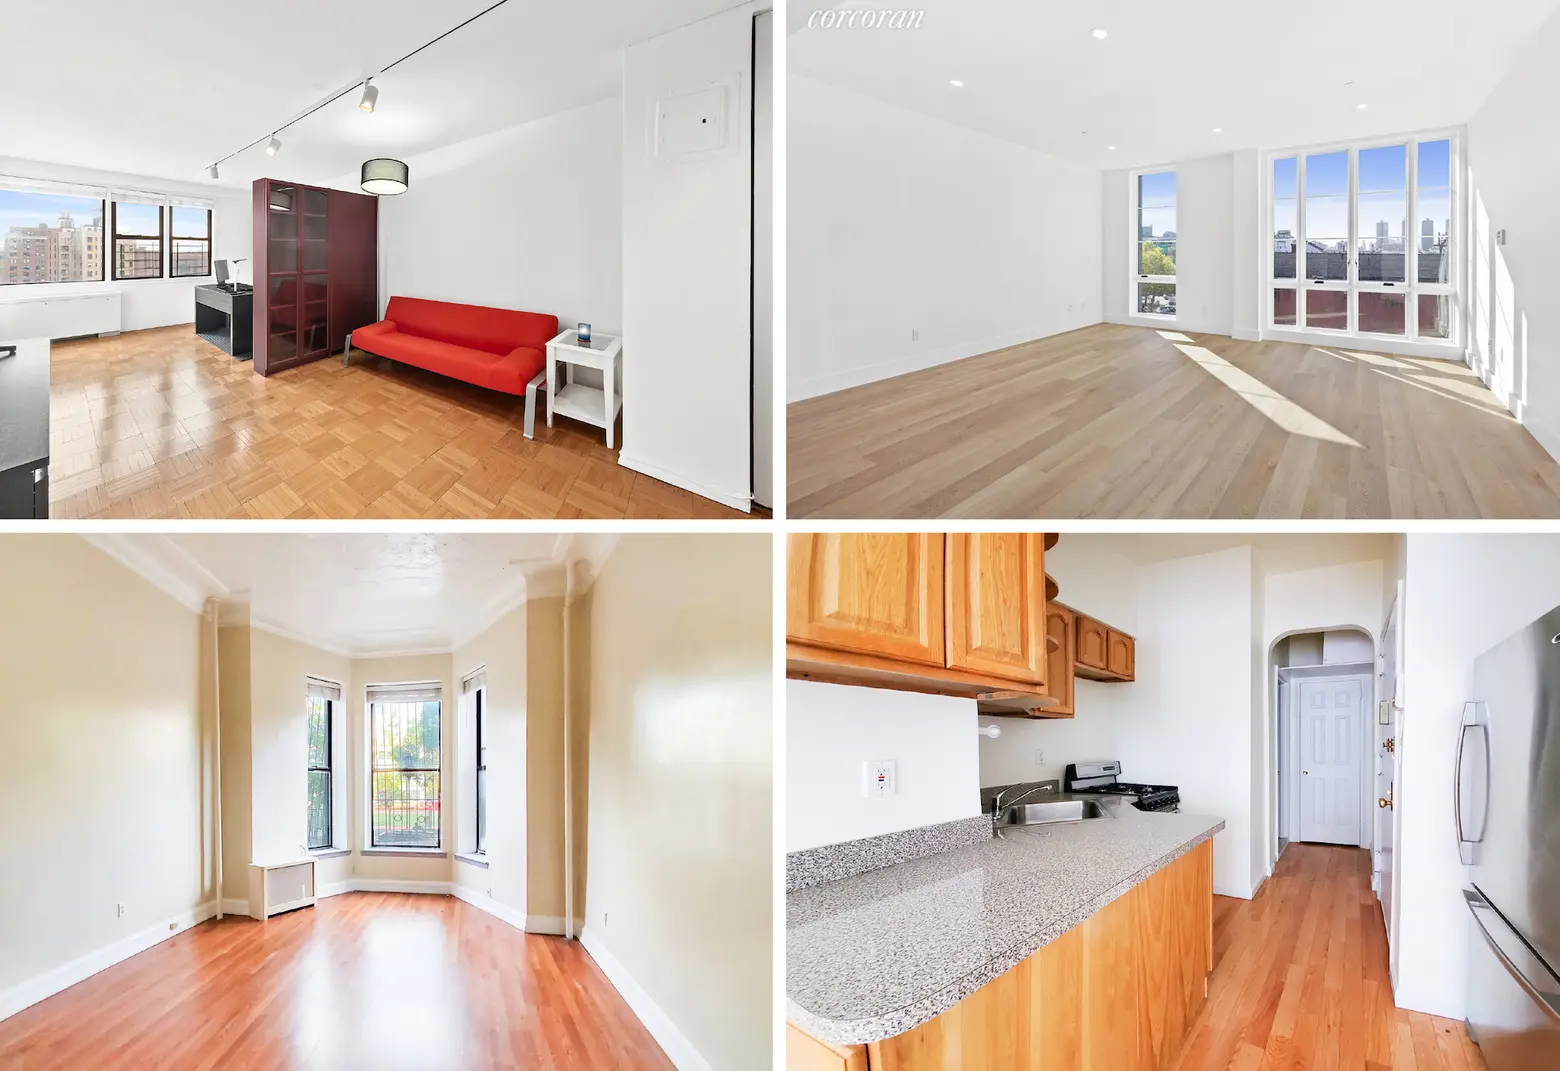 Tired of roommates? Here are 5 studios in NYC renting for under $2,500/month